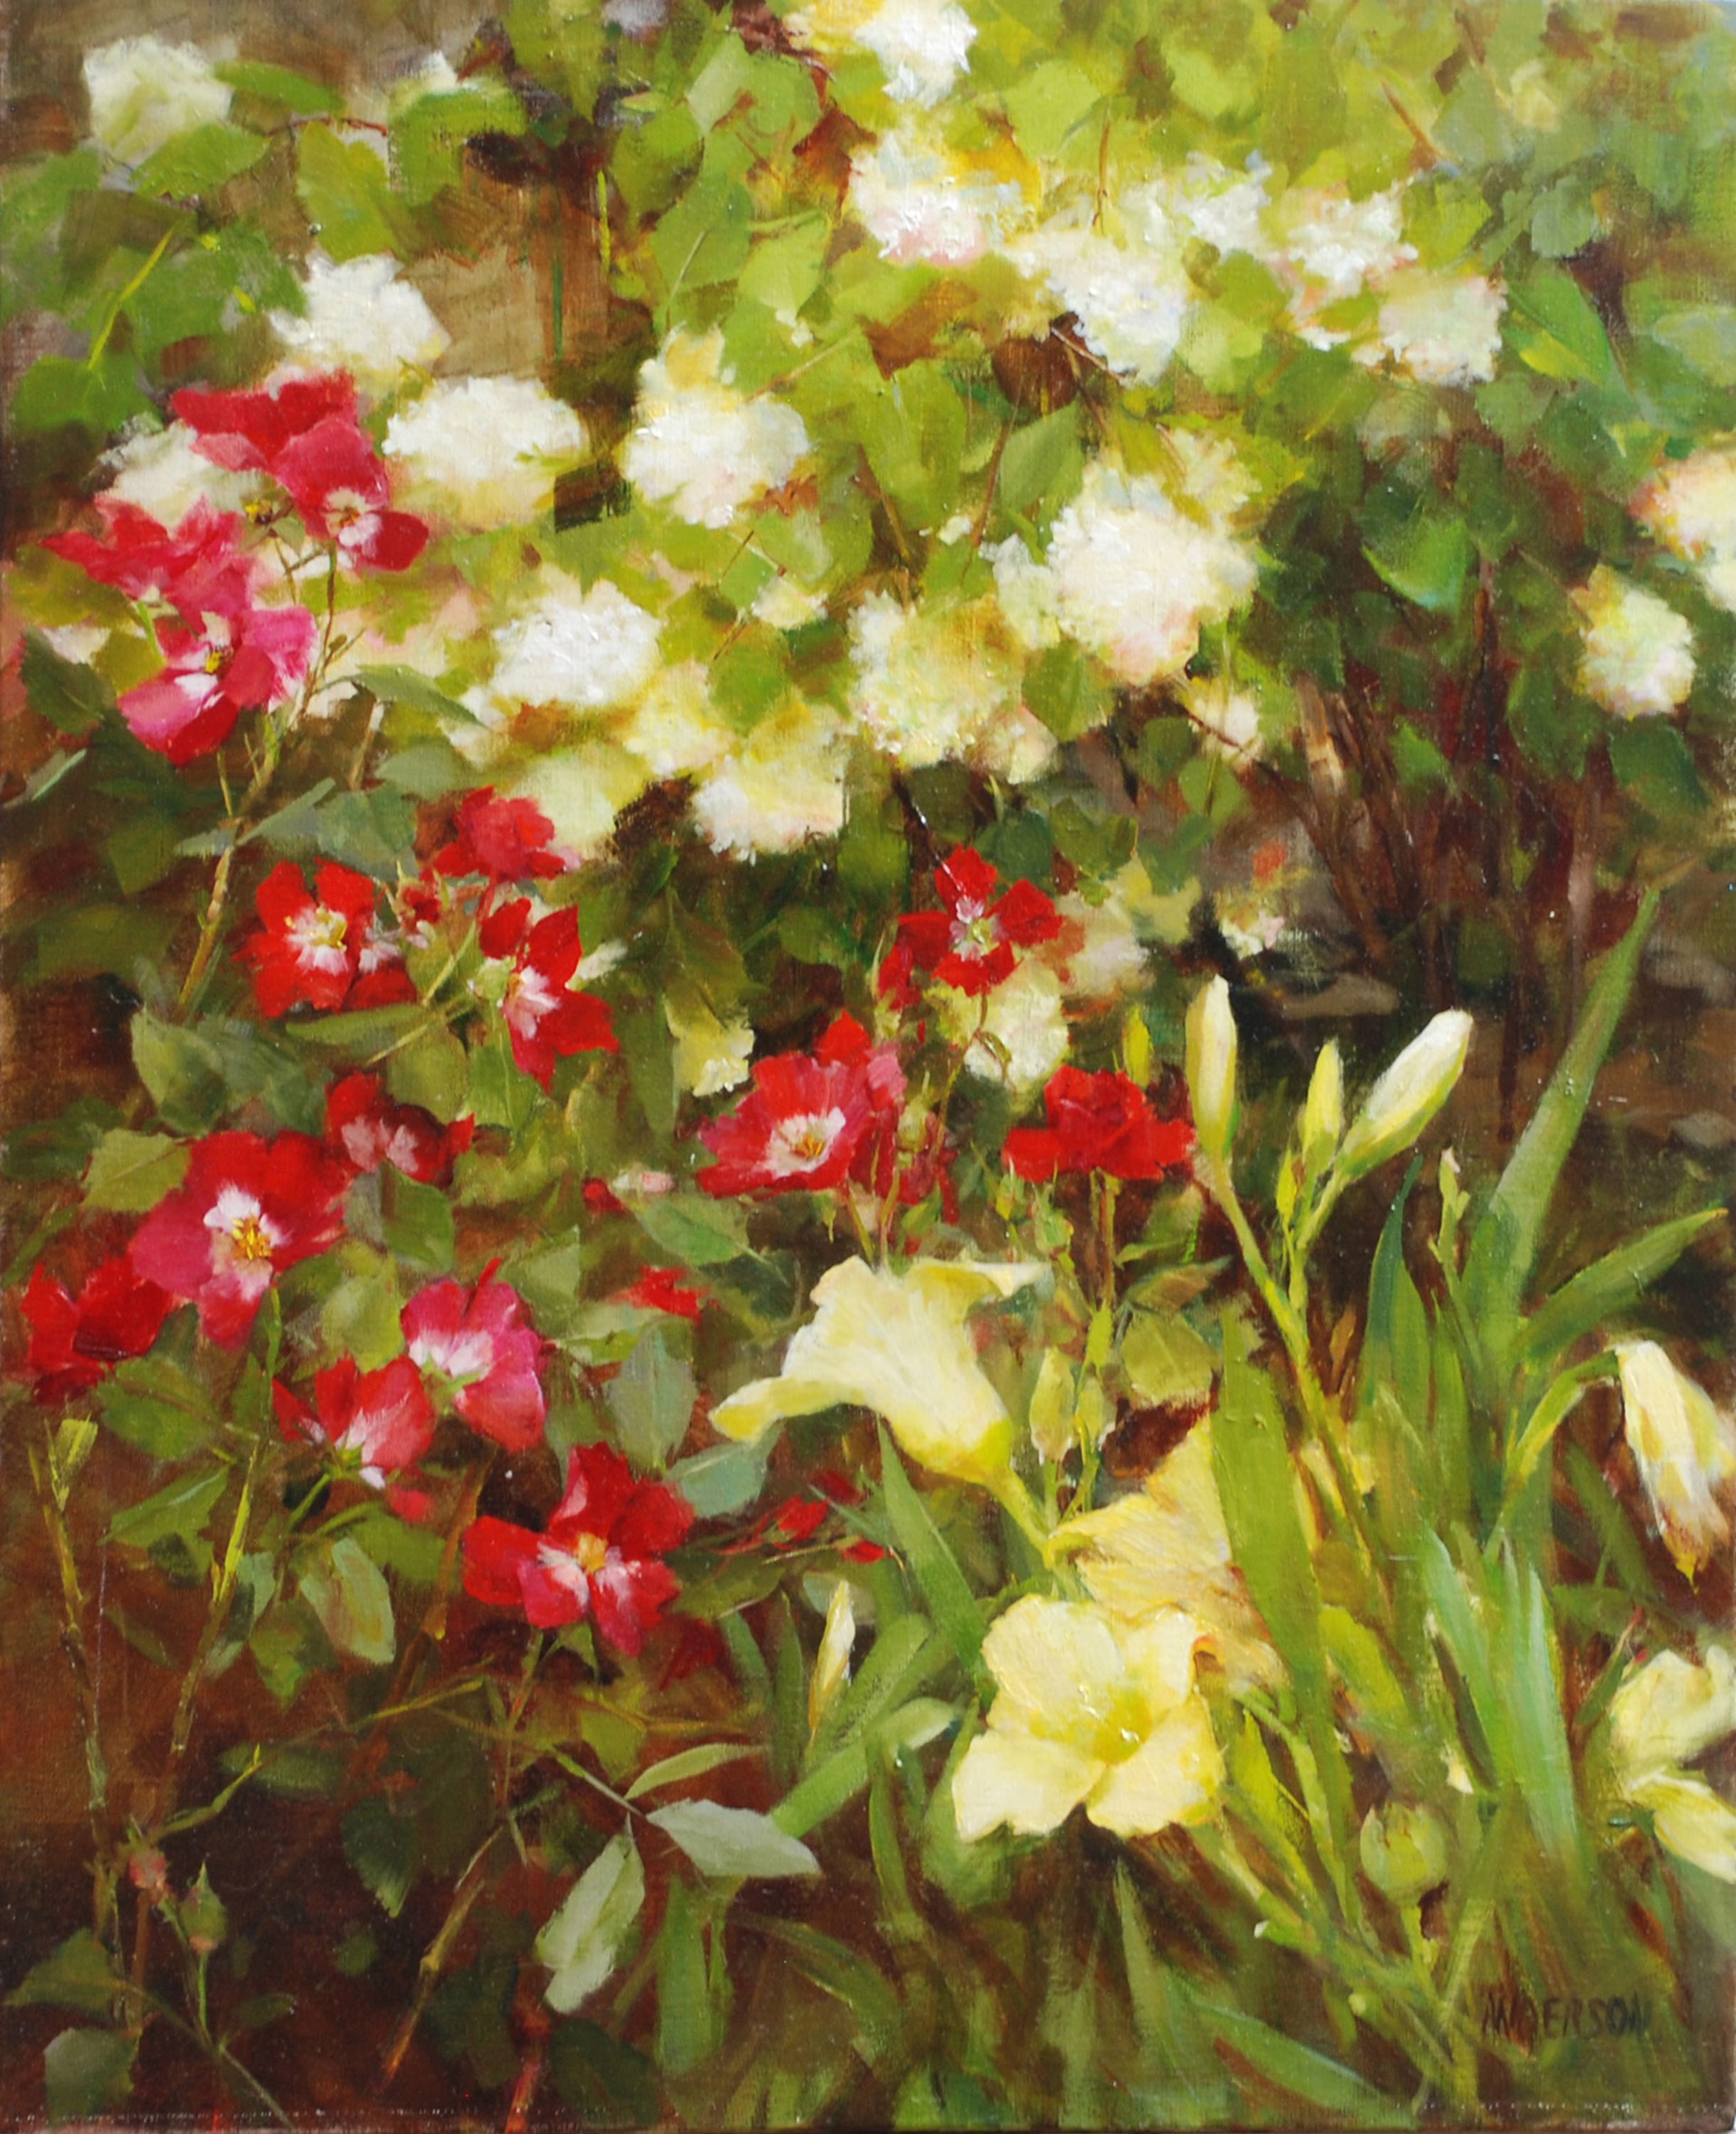 Lilies and Roses by Kathy Anderson